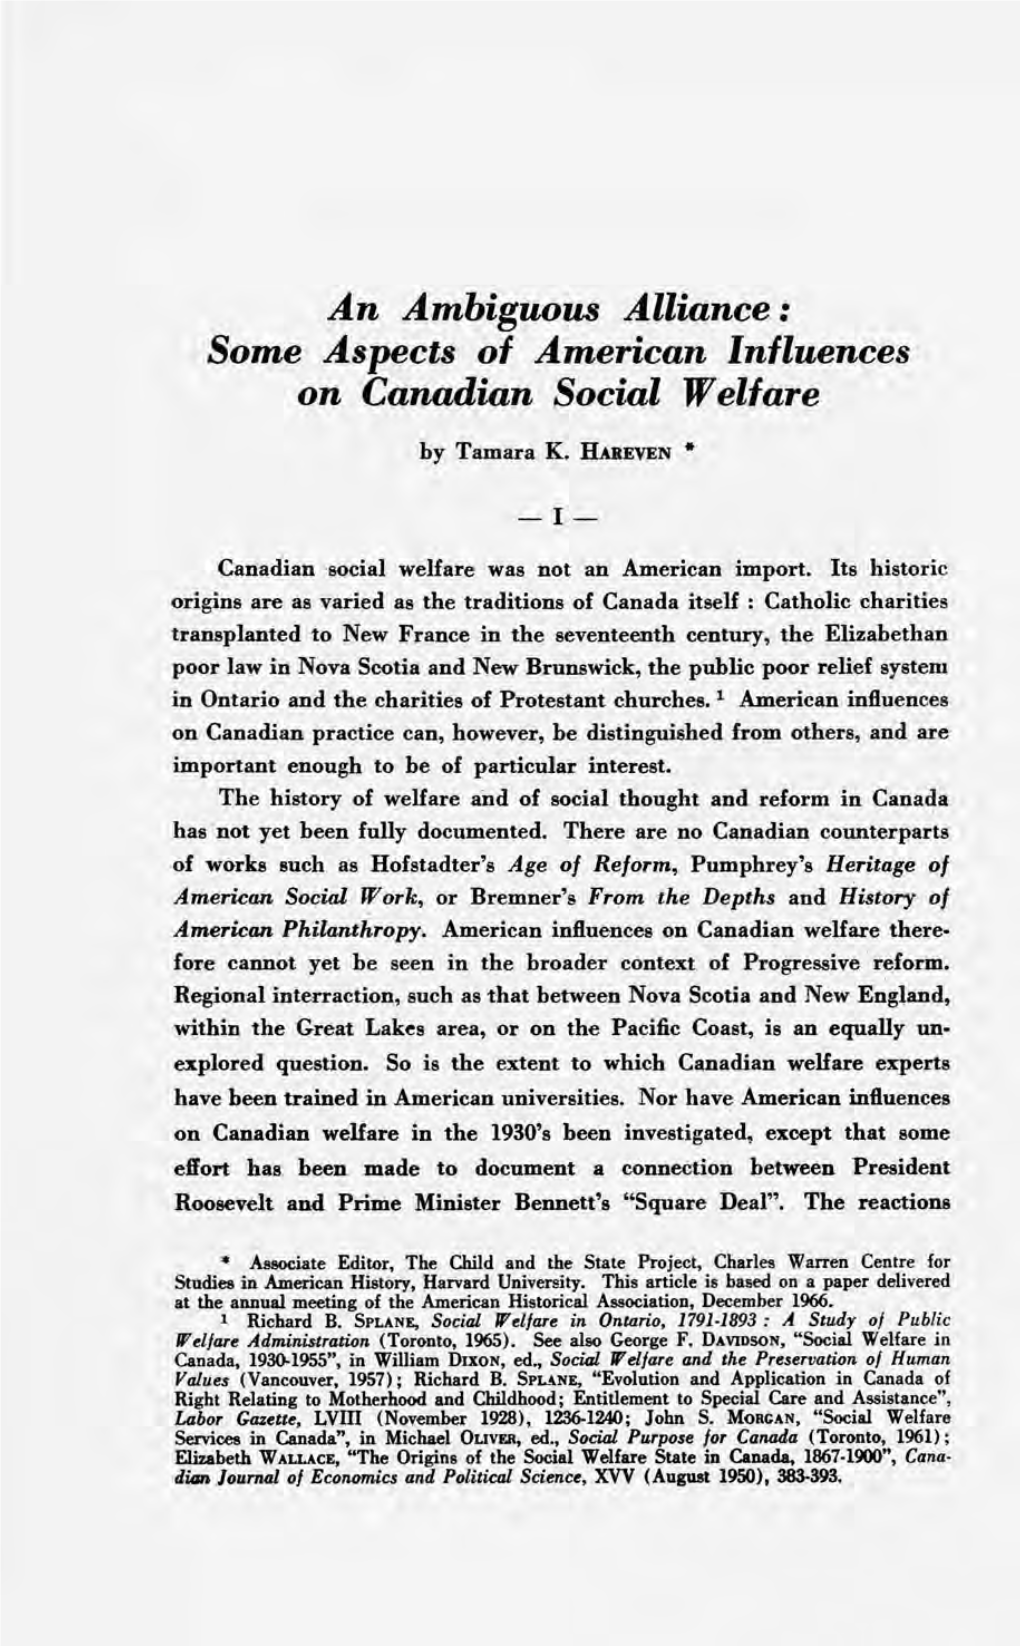 Some Aspects of American Influences on Canadian Social Welfare